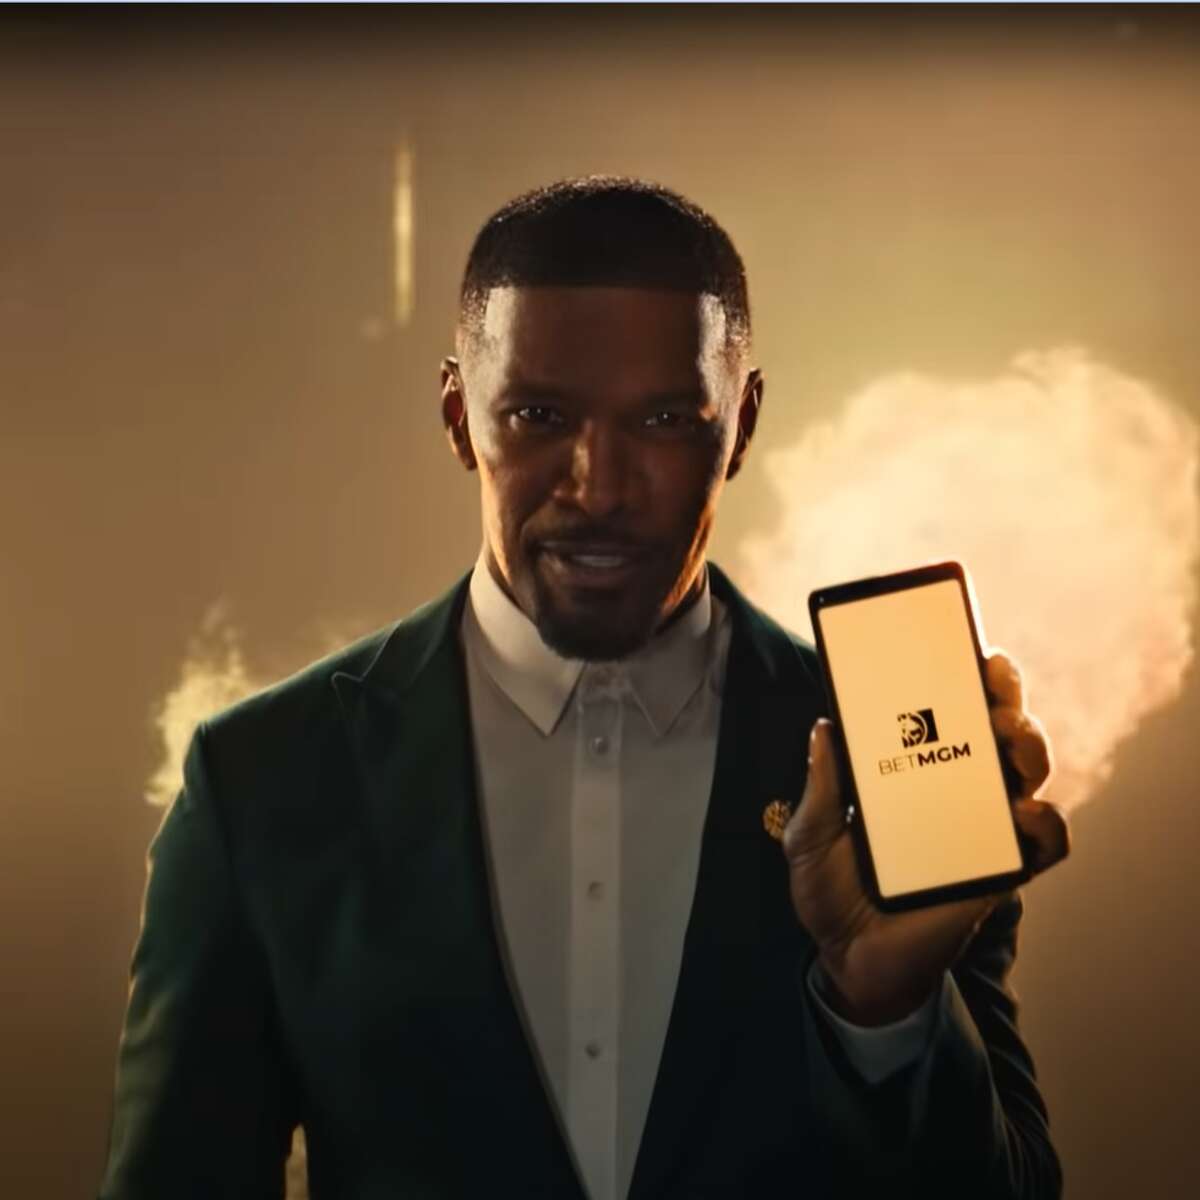 BetMGM's "Win Like a King" national ad campaign starring Jaime Foxx just marked its official debut.